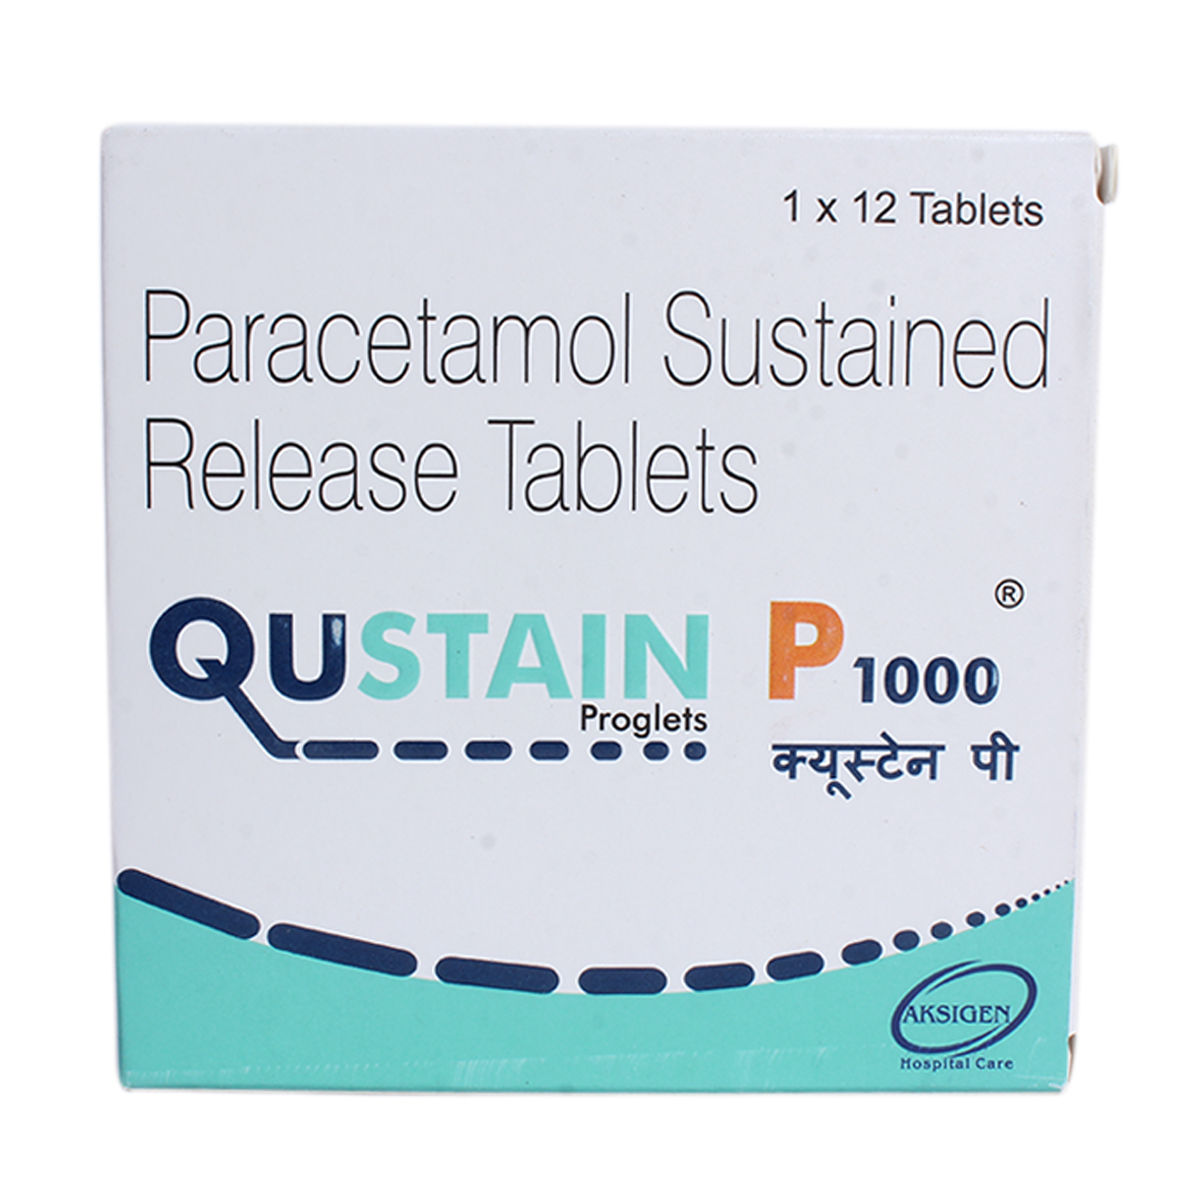 Qustain P 1000 Tablet 12's Price, Uses, Side Effects, Composition ...